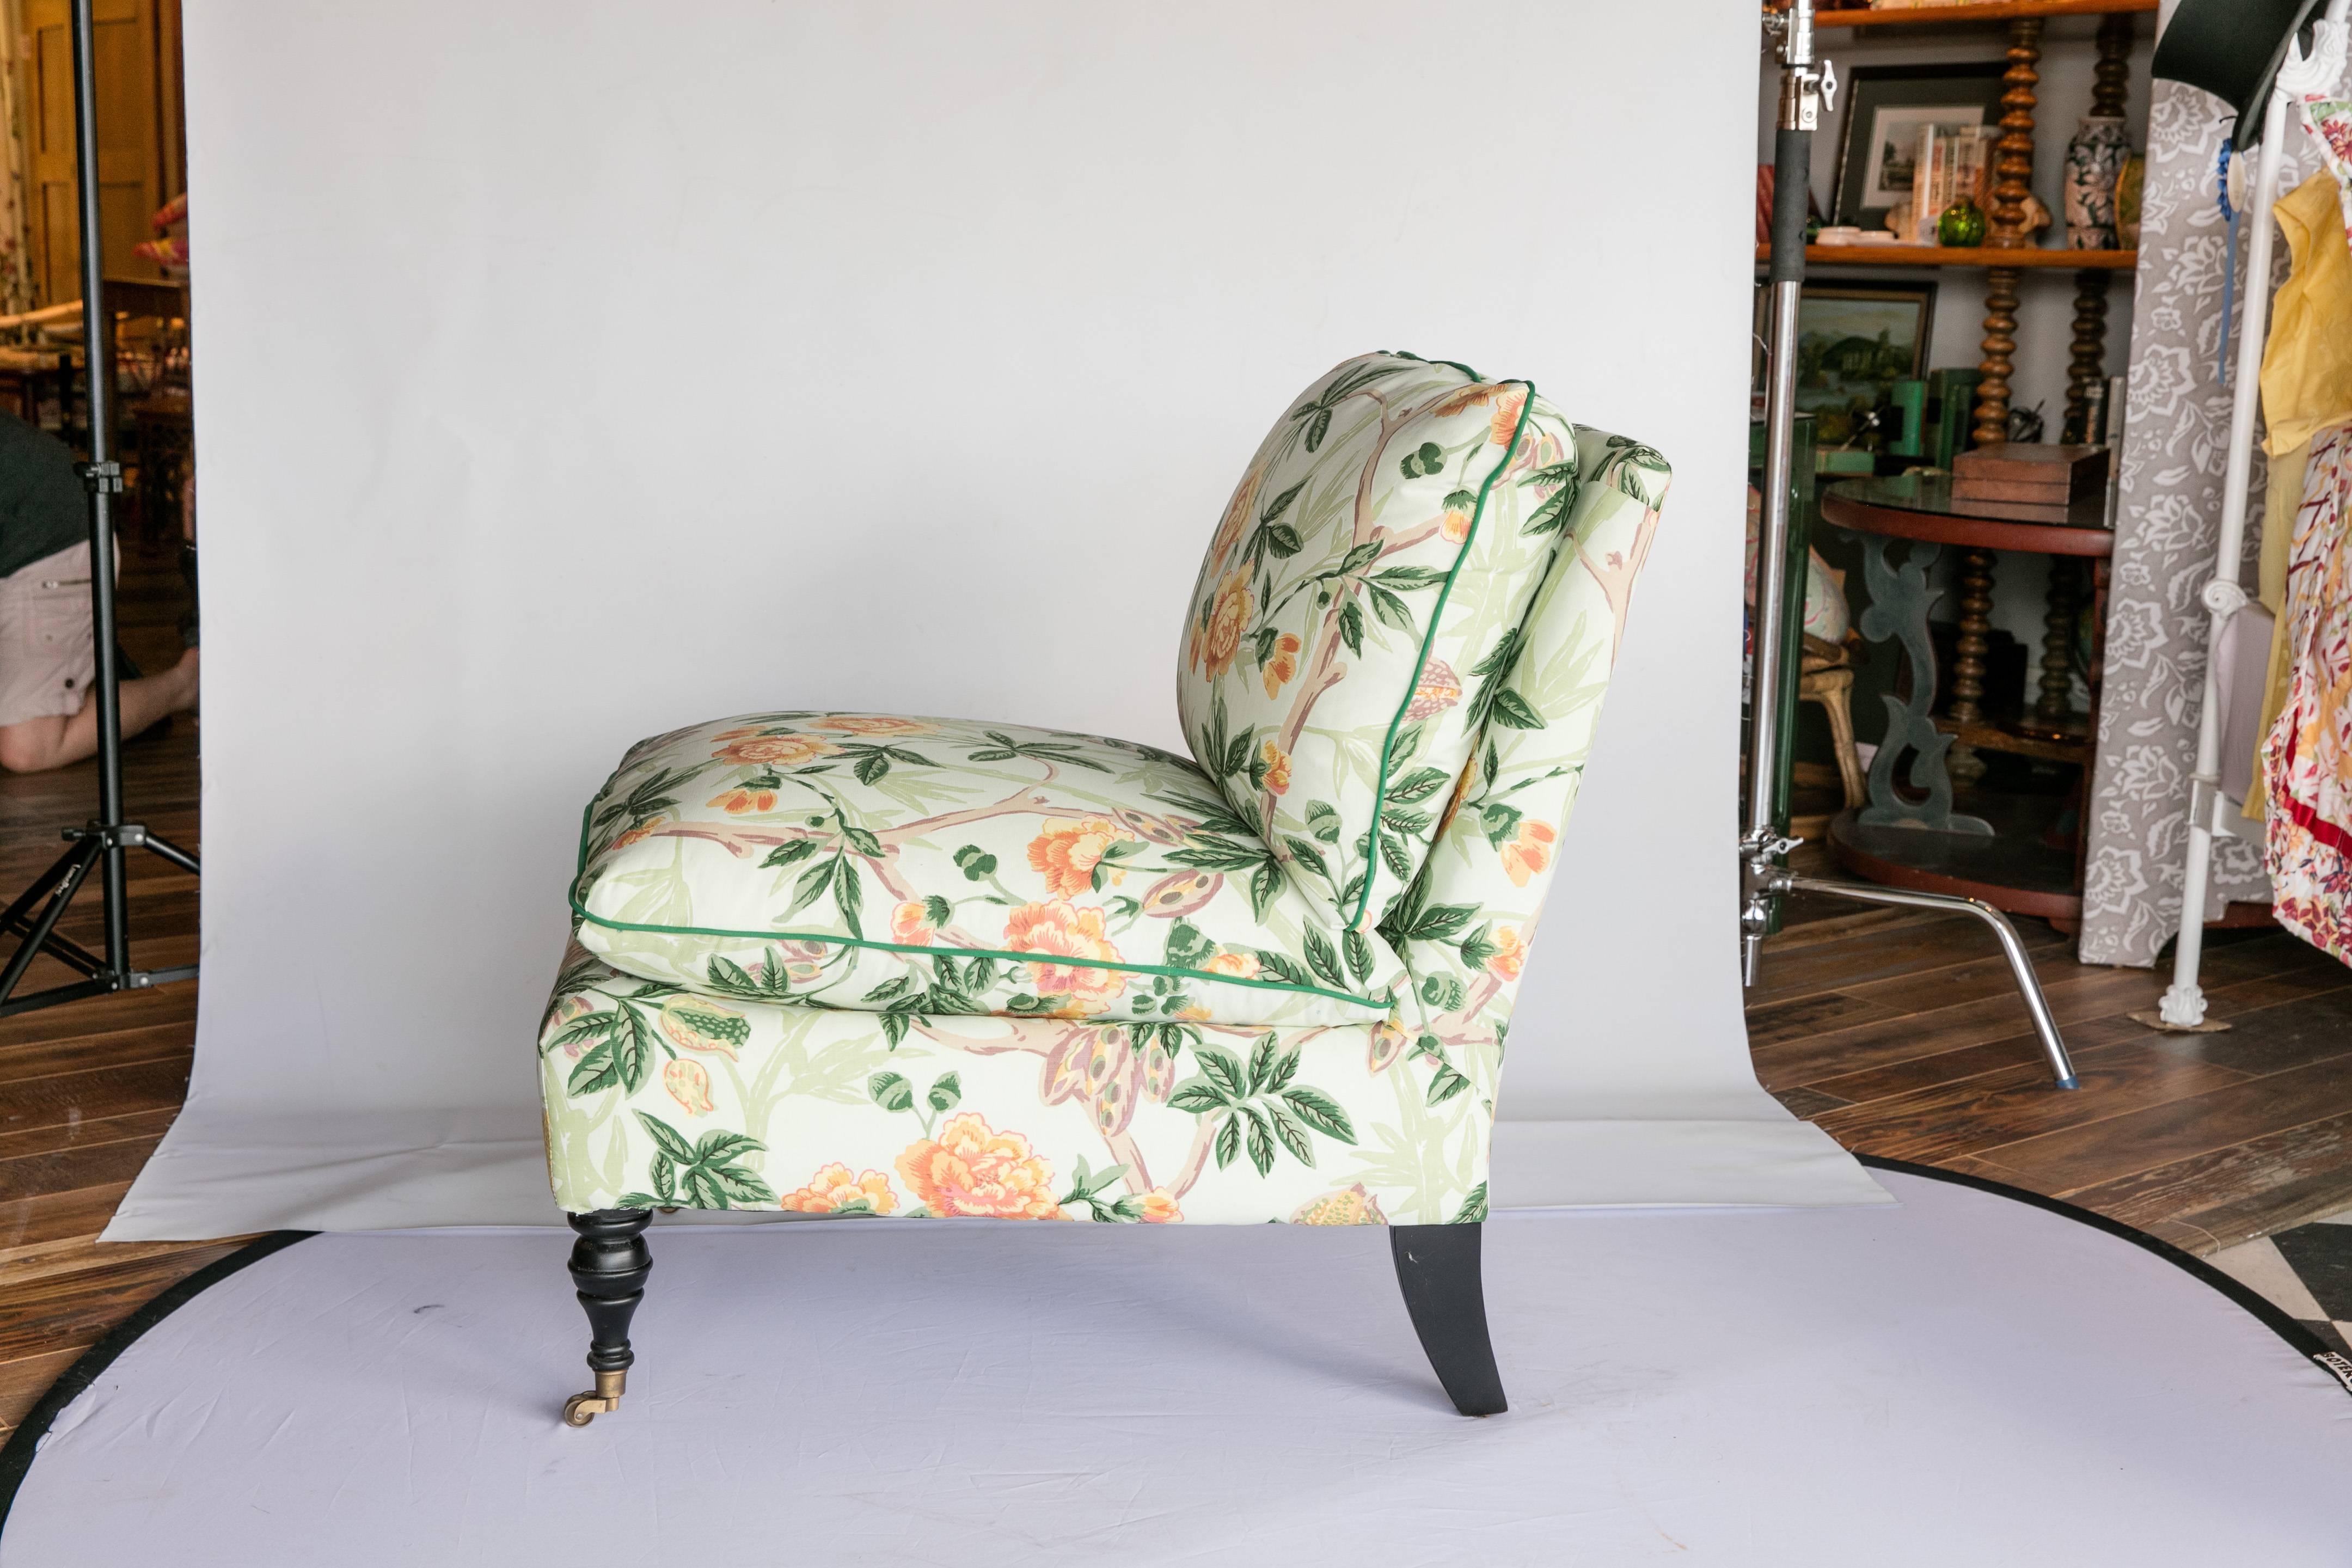 A custom 20th century Edwardian-style slipper chair newly upholstered in a cotton Brunschwig and Fils chinoiserie-style floral print with a light green/blue ground. The front legs are turned and have brass casters. Seat and back cushions are